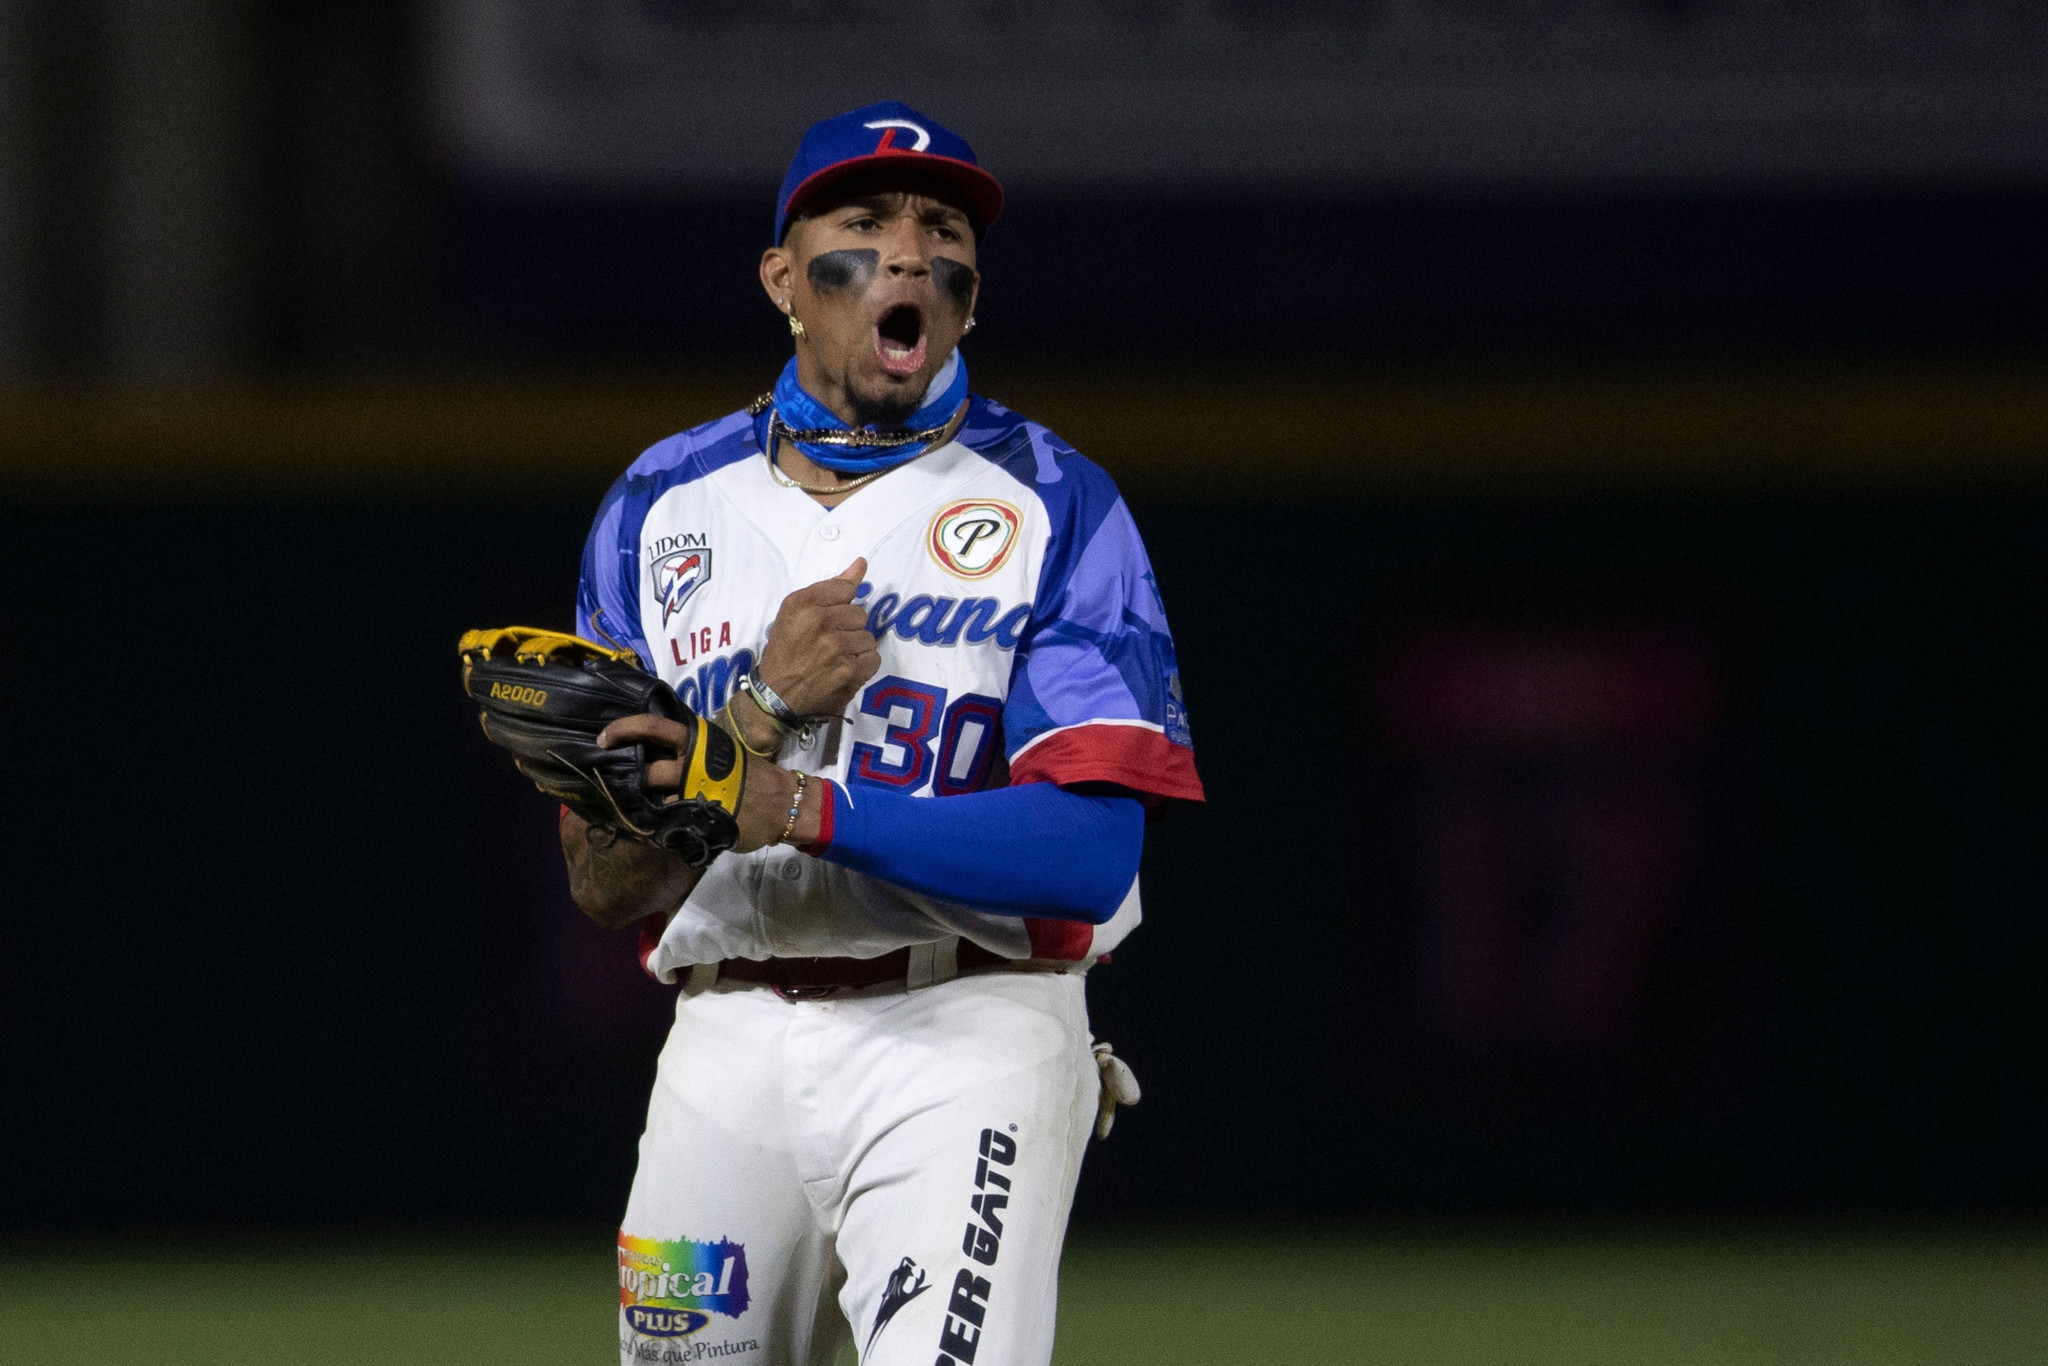 university-baseball-league-to-launch-in-dominican-republic-in-august